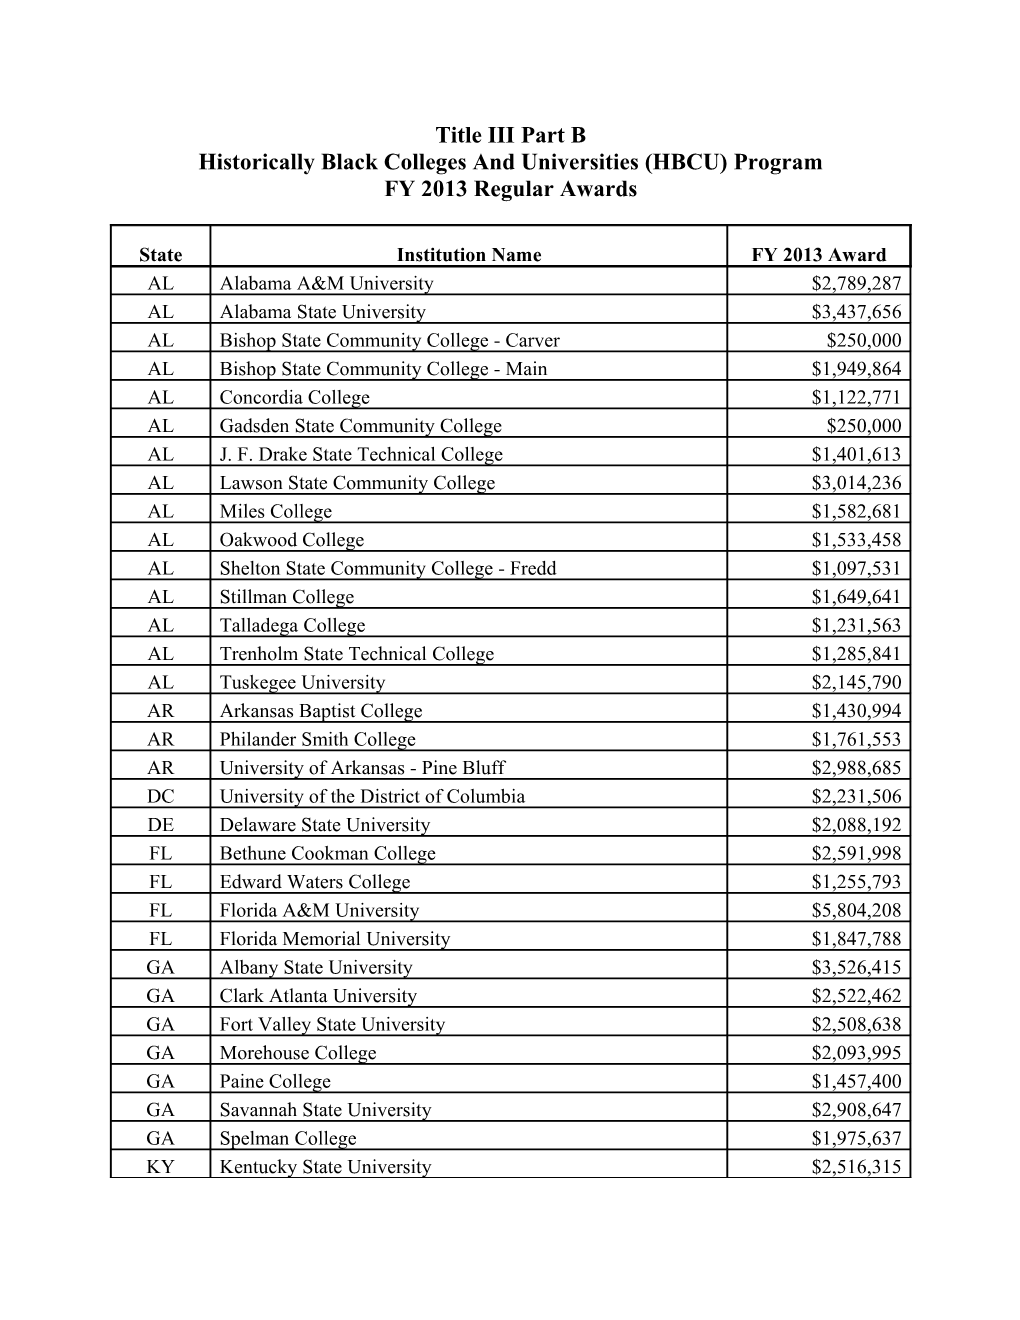 FY 2013 Grantees and Regular Awards Under the Title III-B HBCU Program (MS Word)